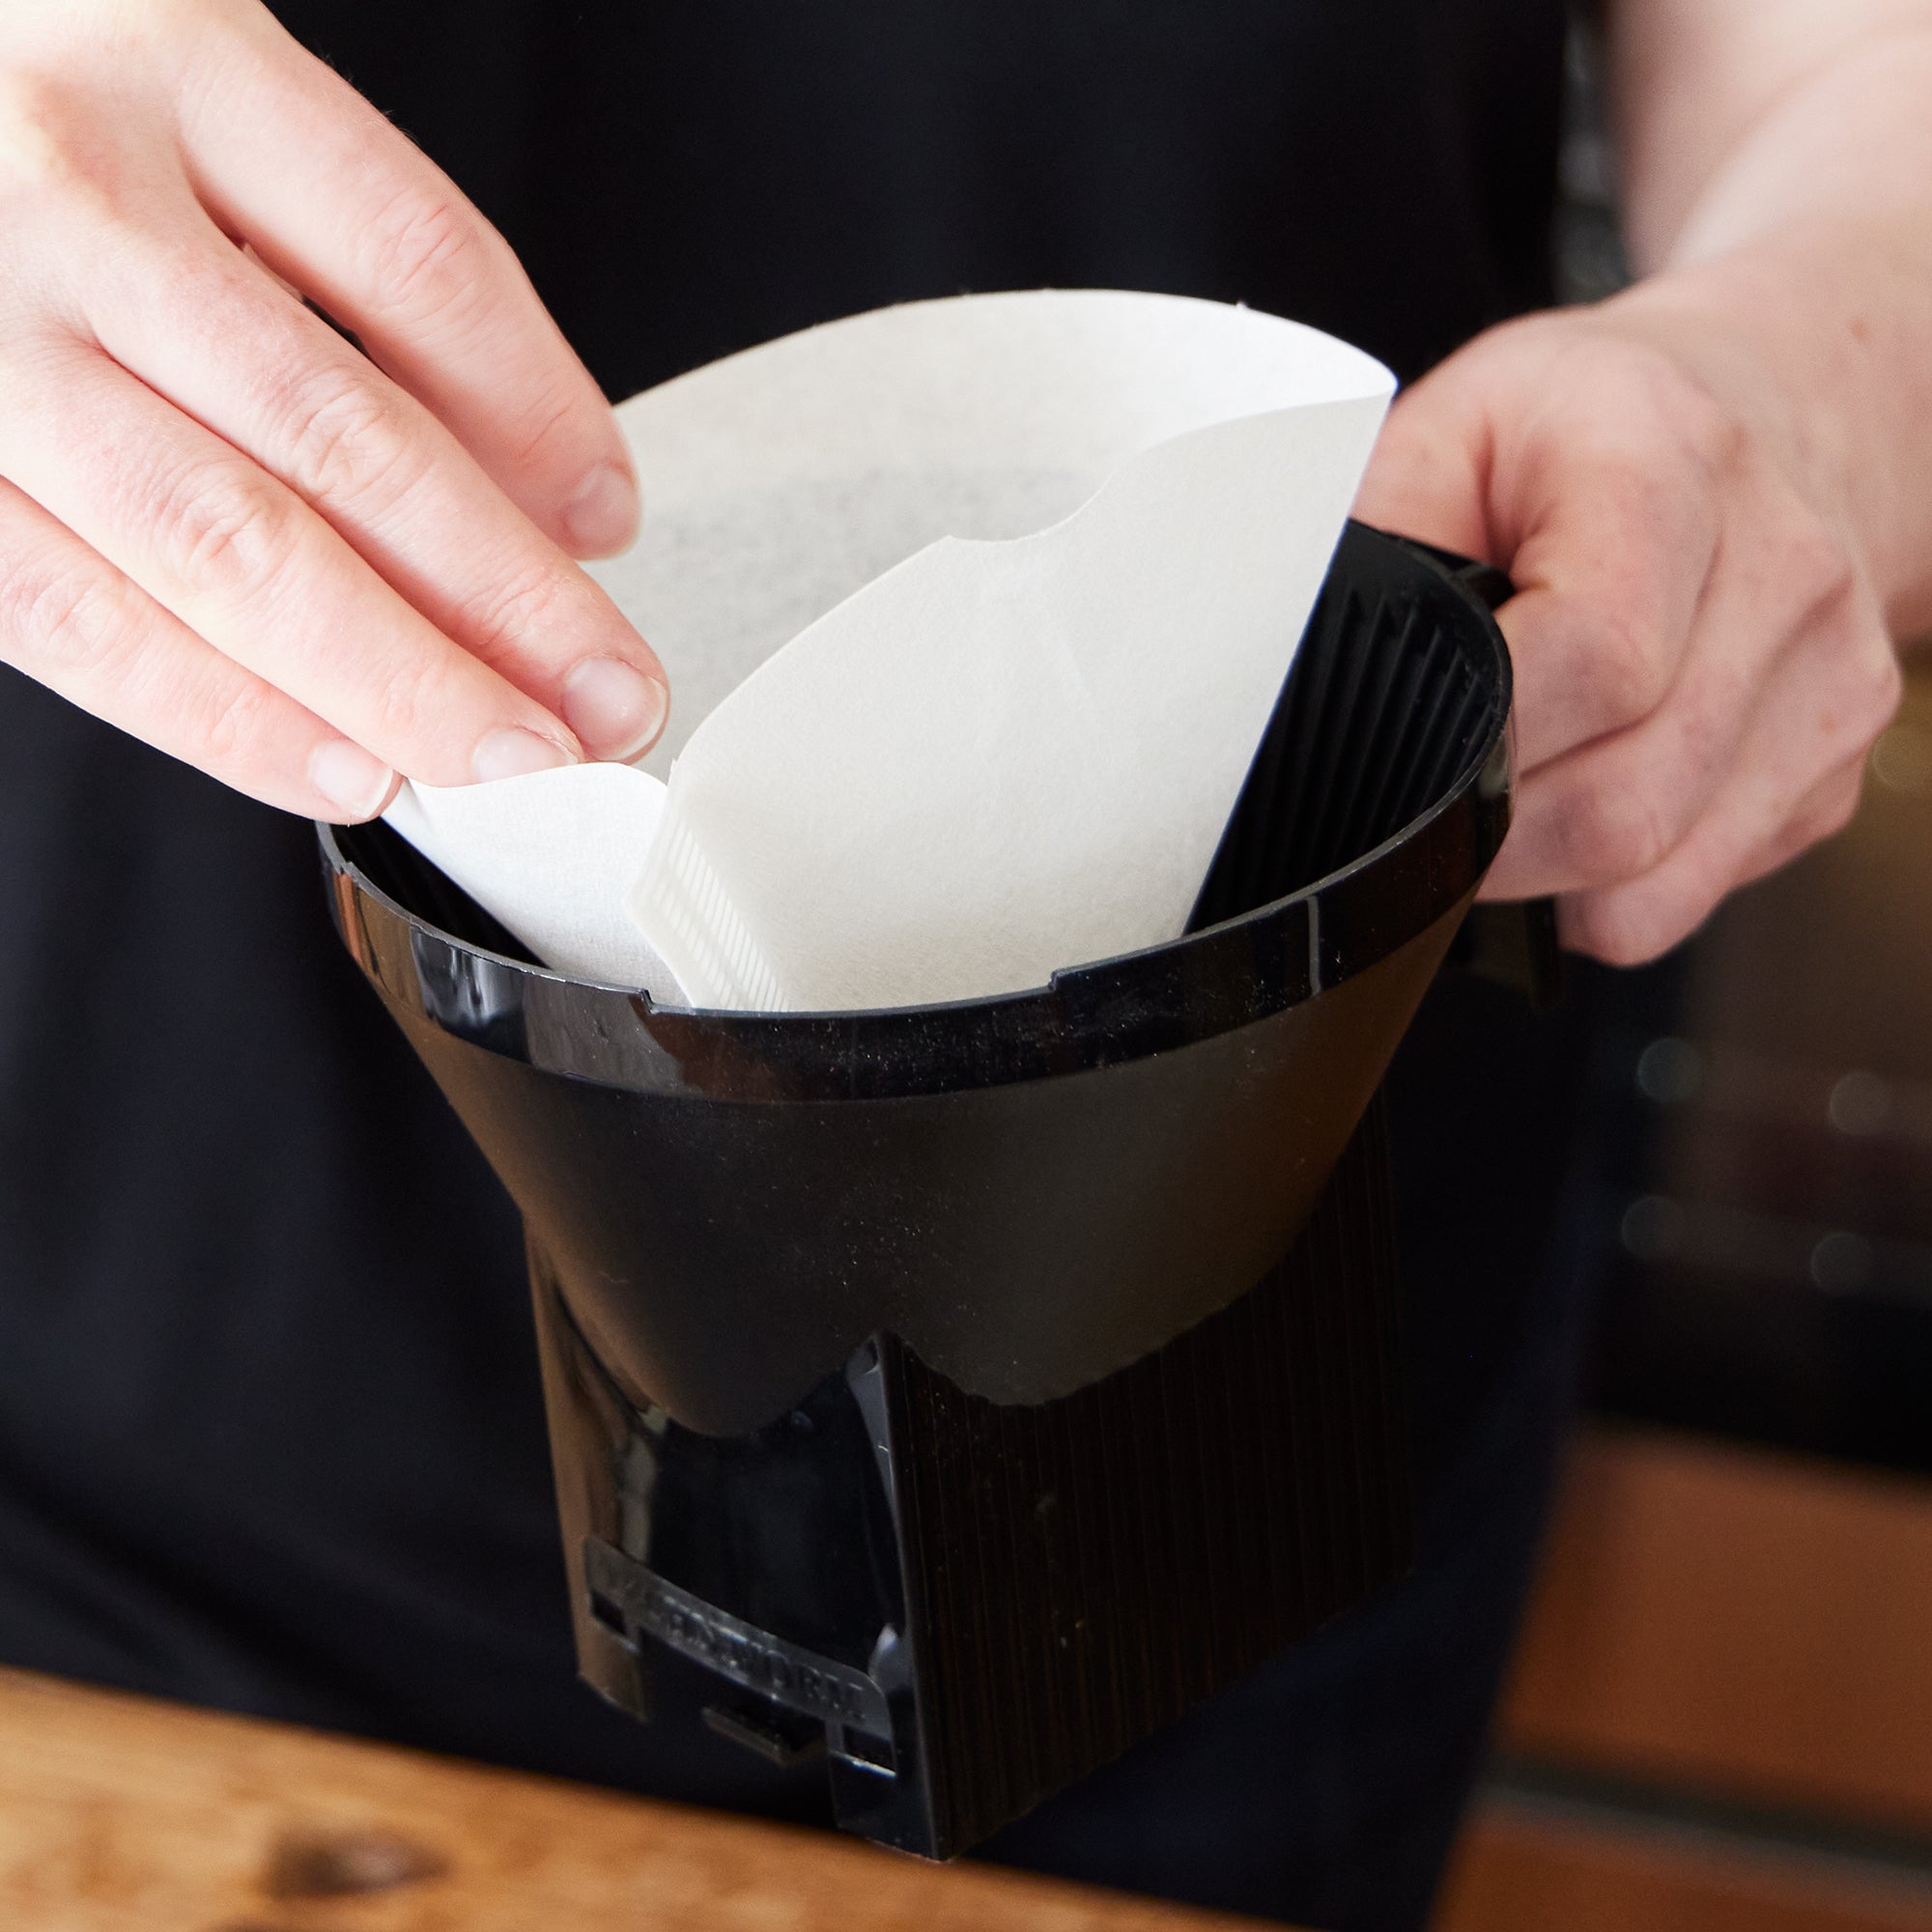 Moccamaster #4 Coffee Filters | White Paper